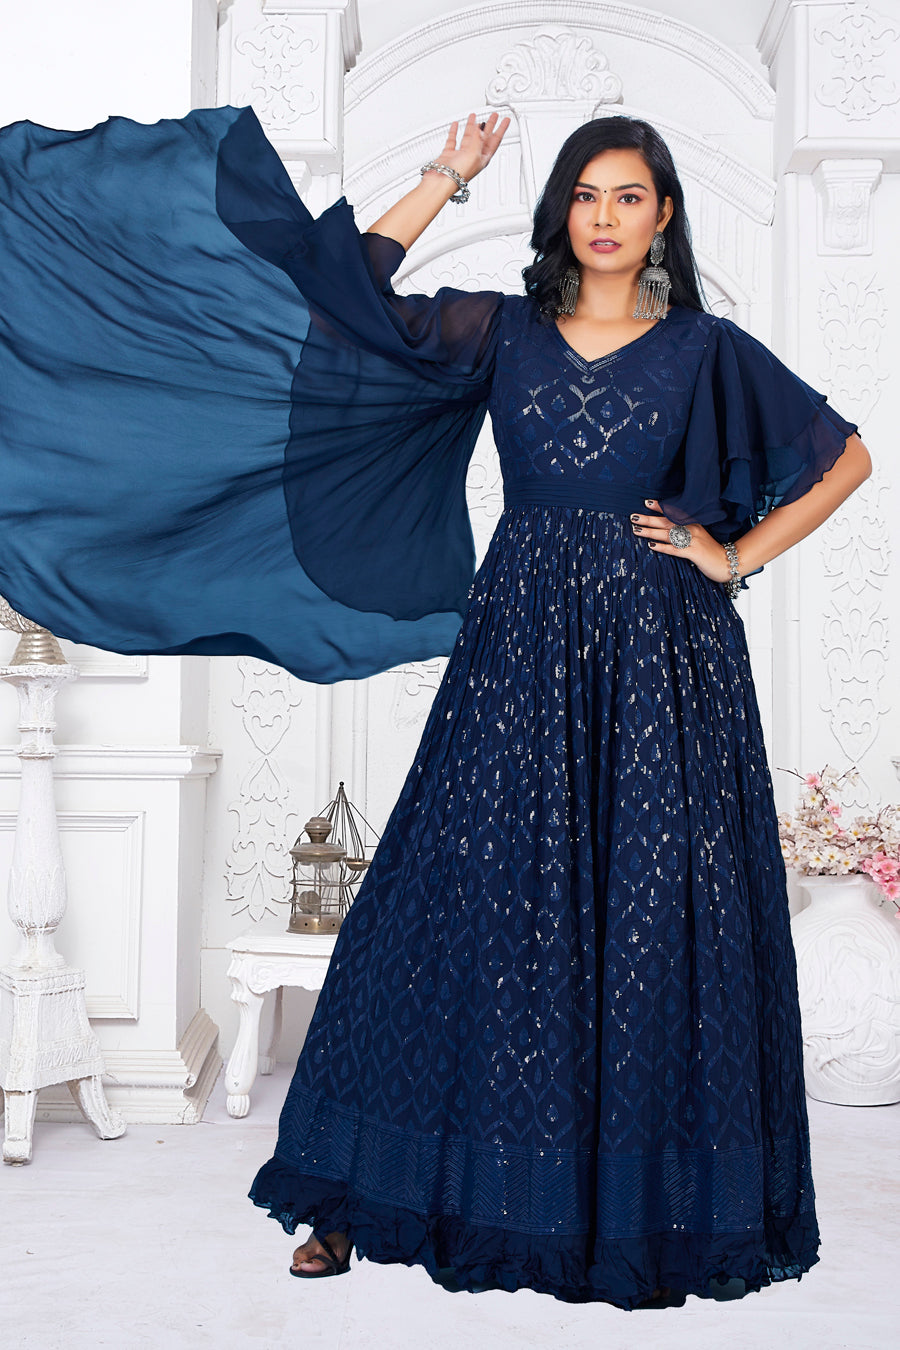 Illusion Navy Lace Long Sleeve Layered Satin Formal Gown | Indian gowns  dresses, Long gown dress, Gowns dresses